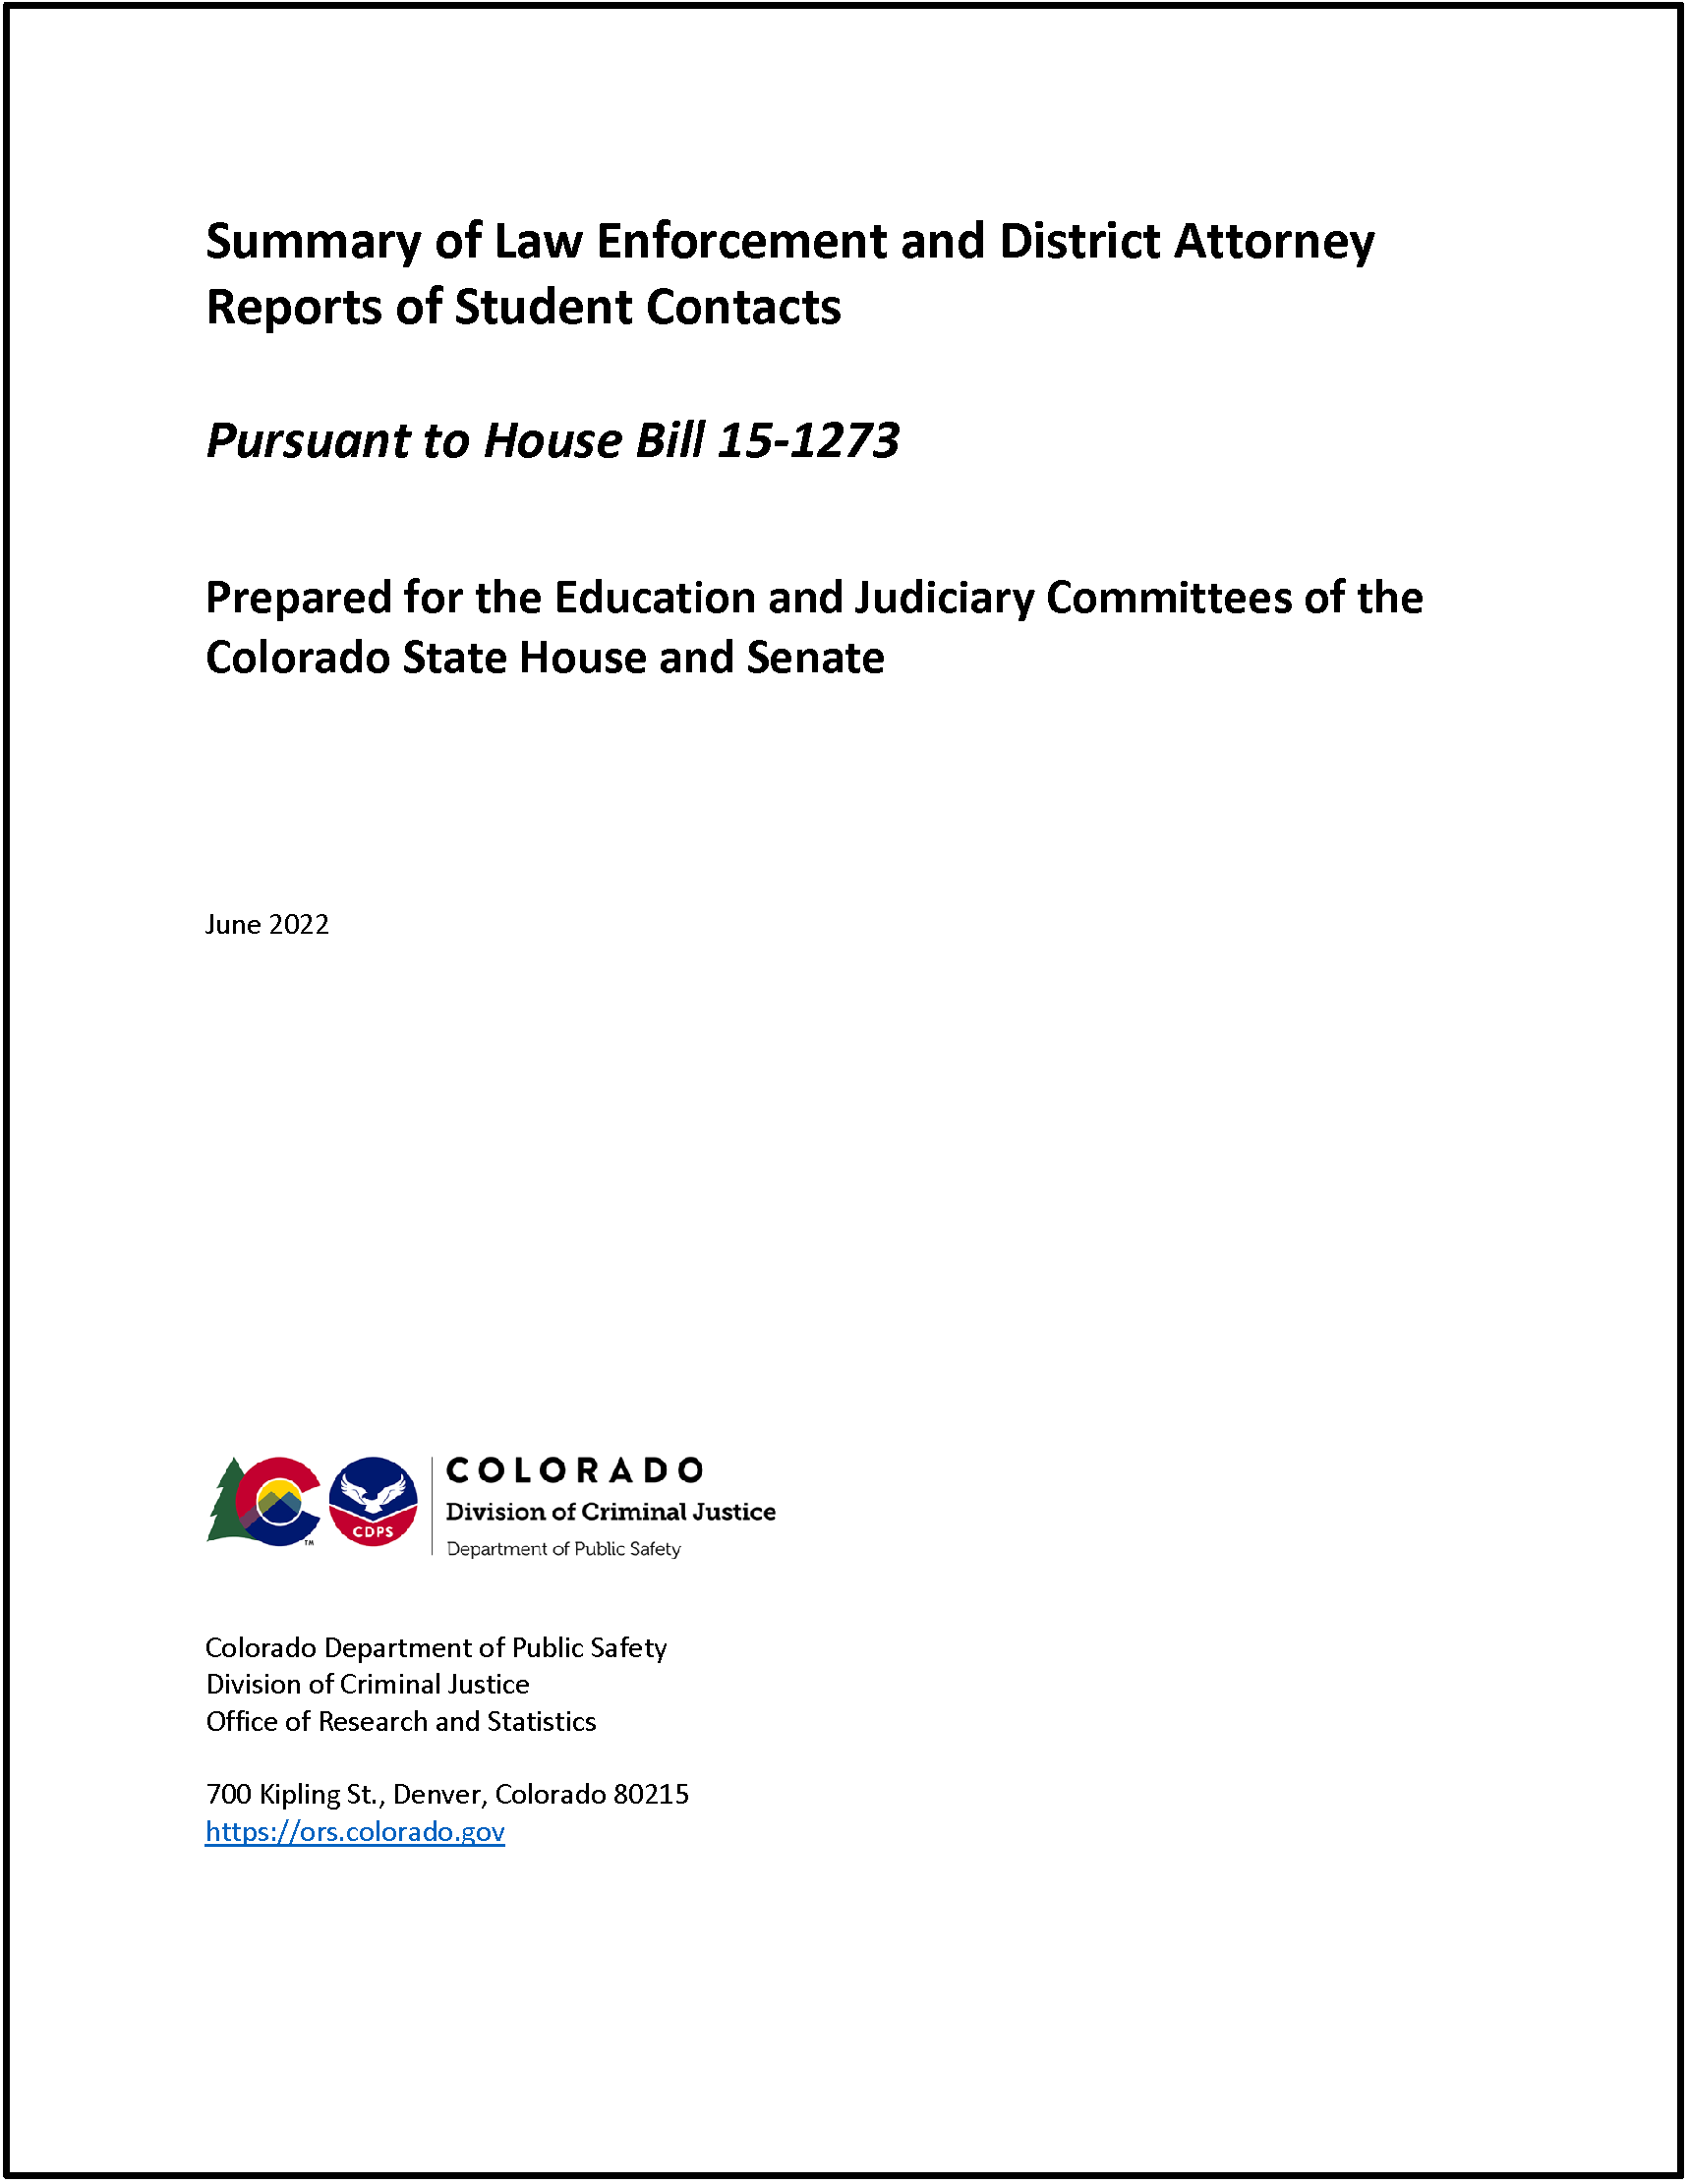 Summary of Law Enforcement and District Attorney Reports of Student Contacts: Academic Years 2020-2021 (June 2022)